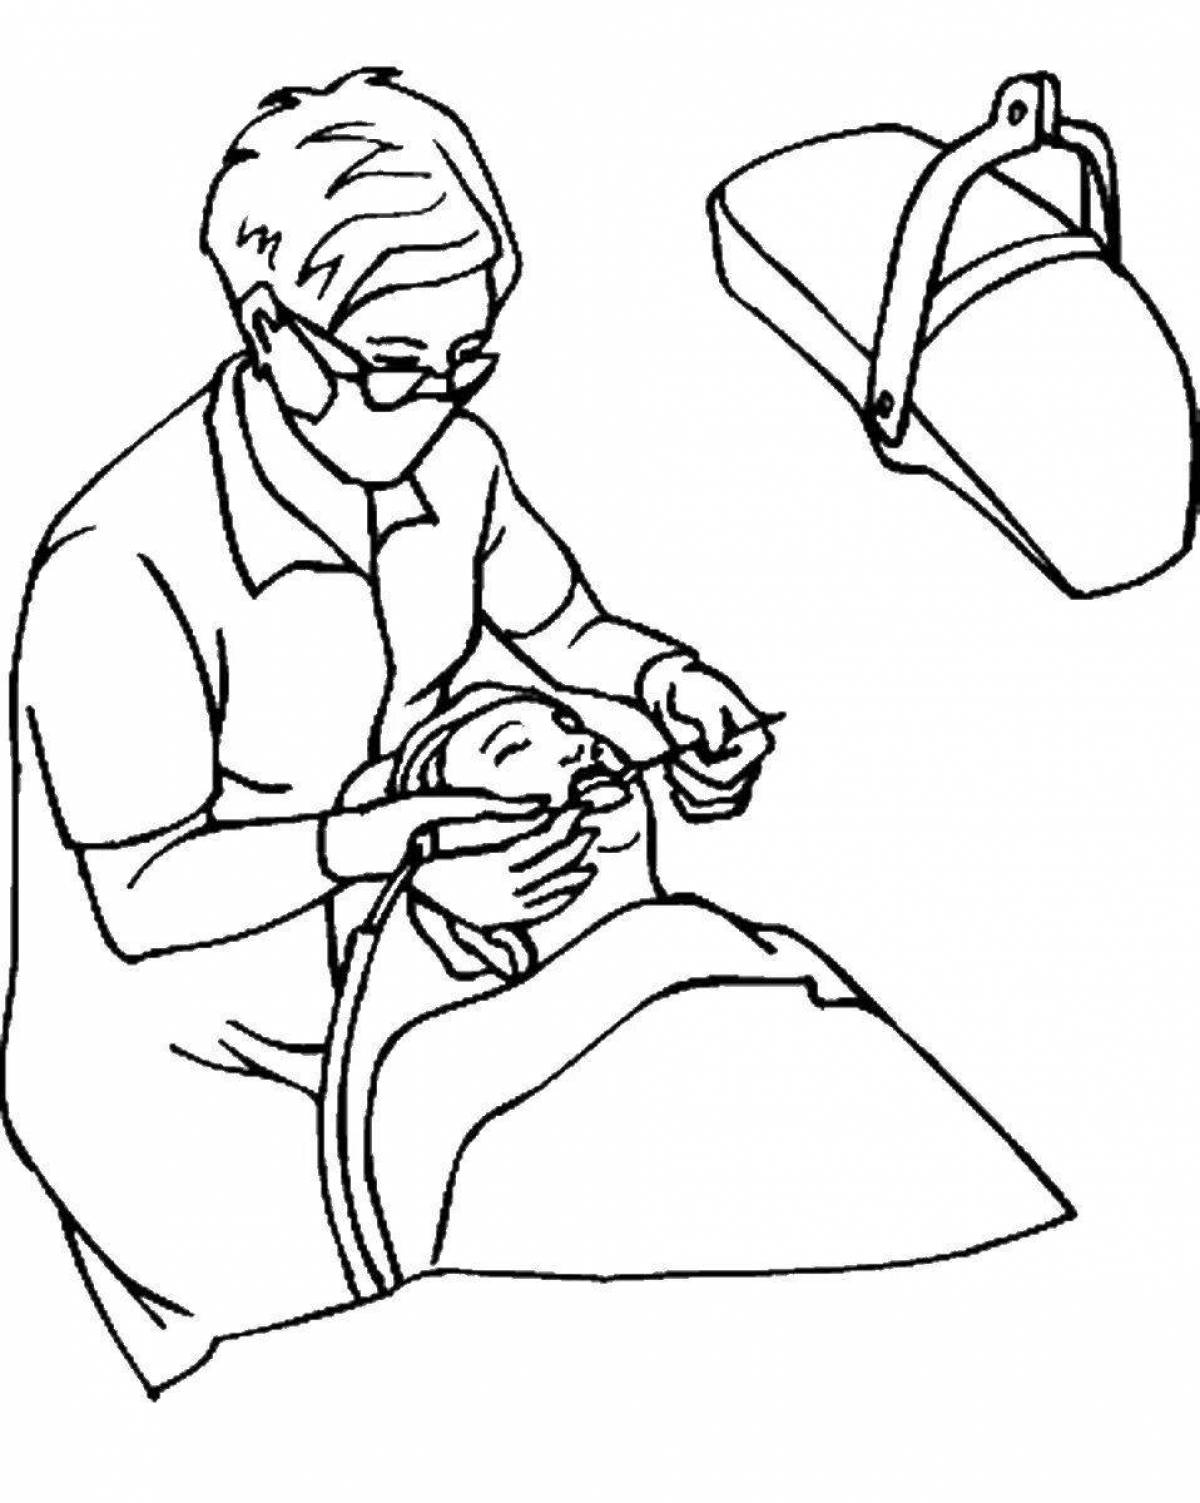 Intriguing surgery coloring page